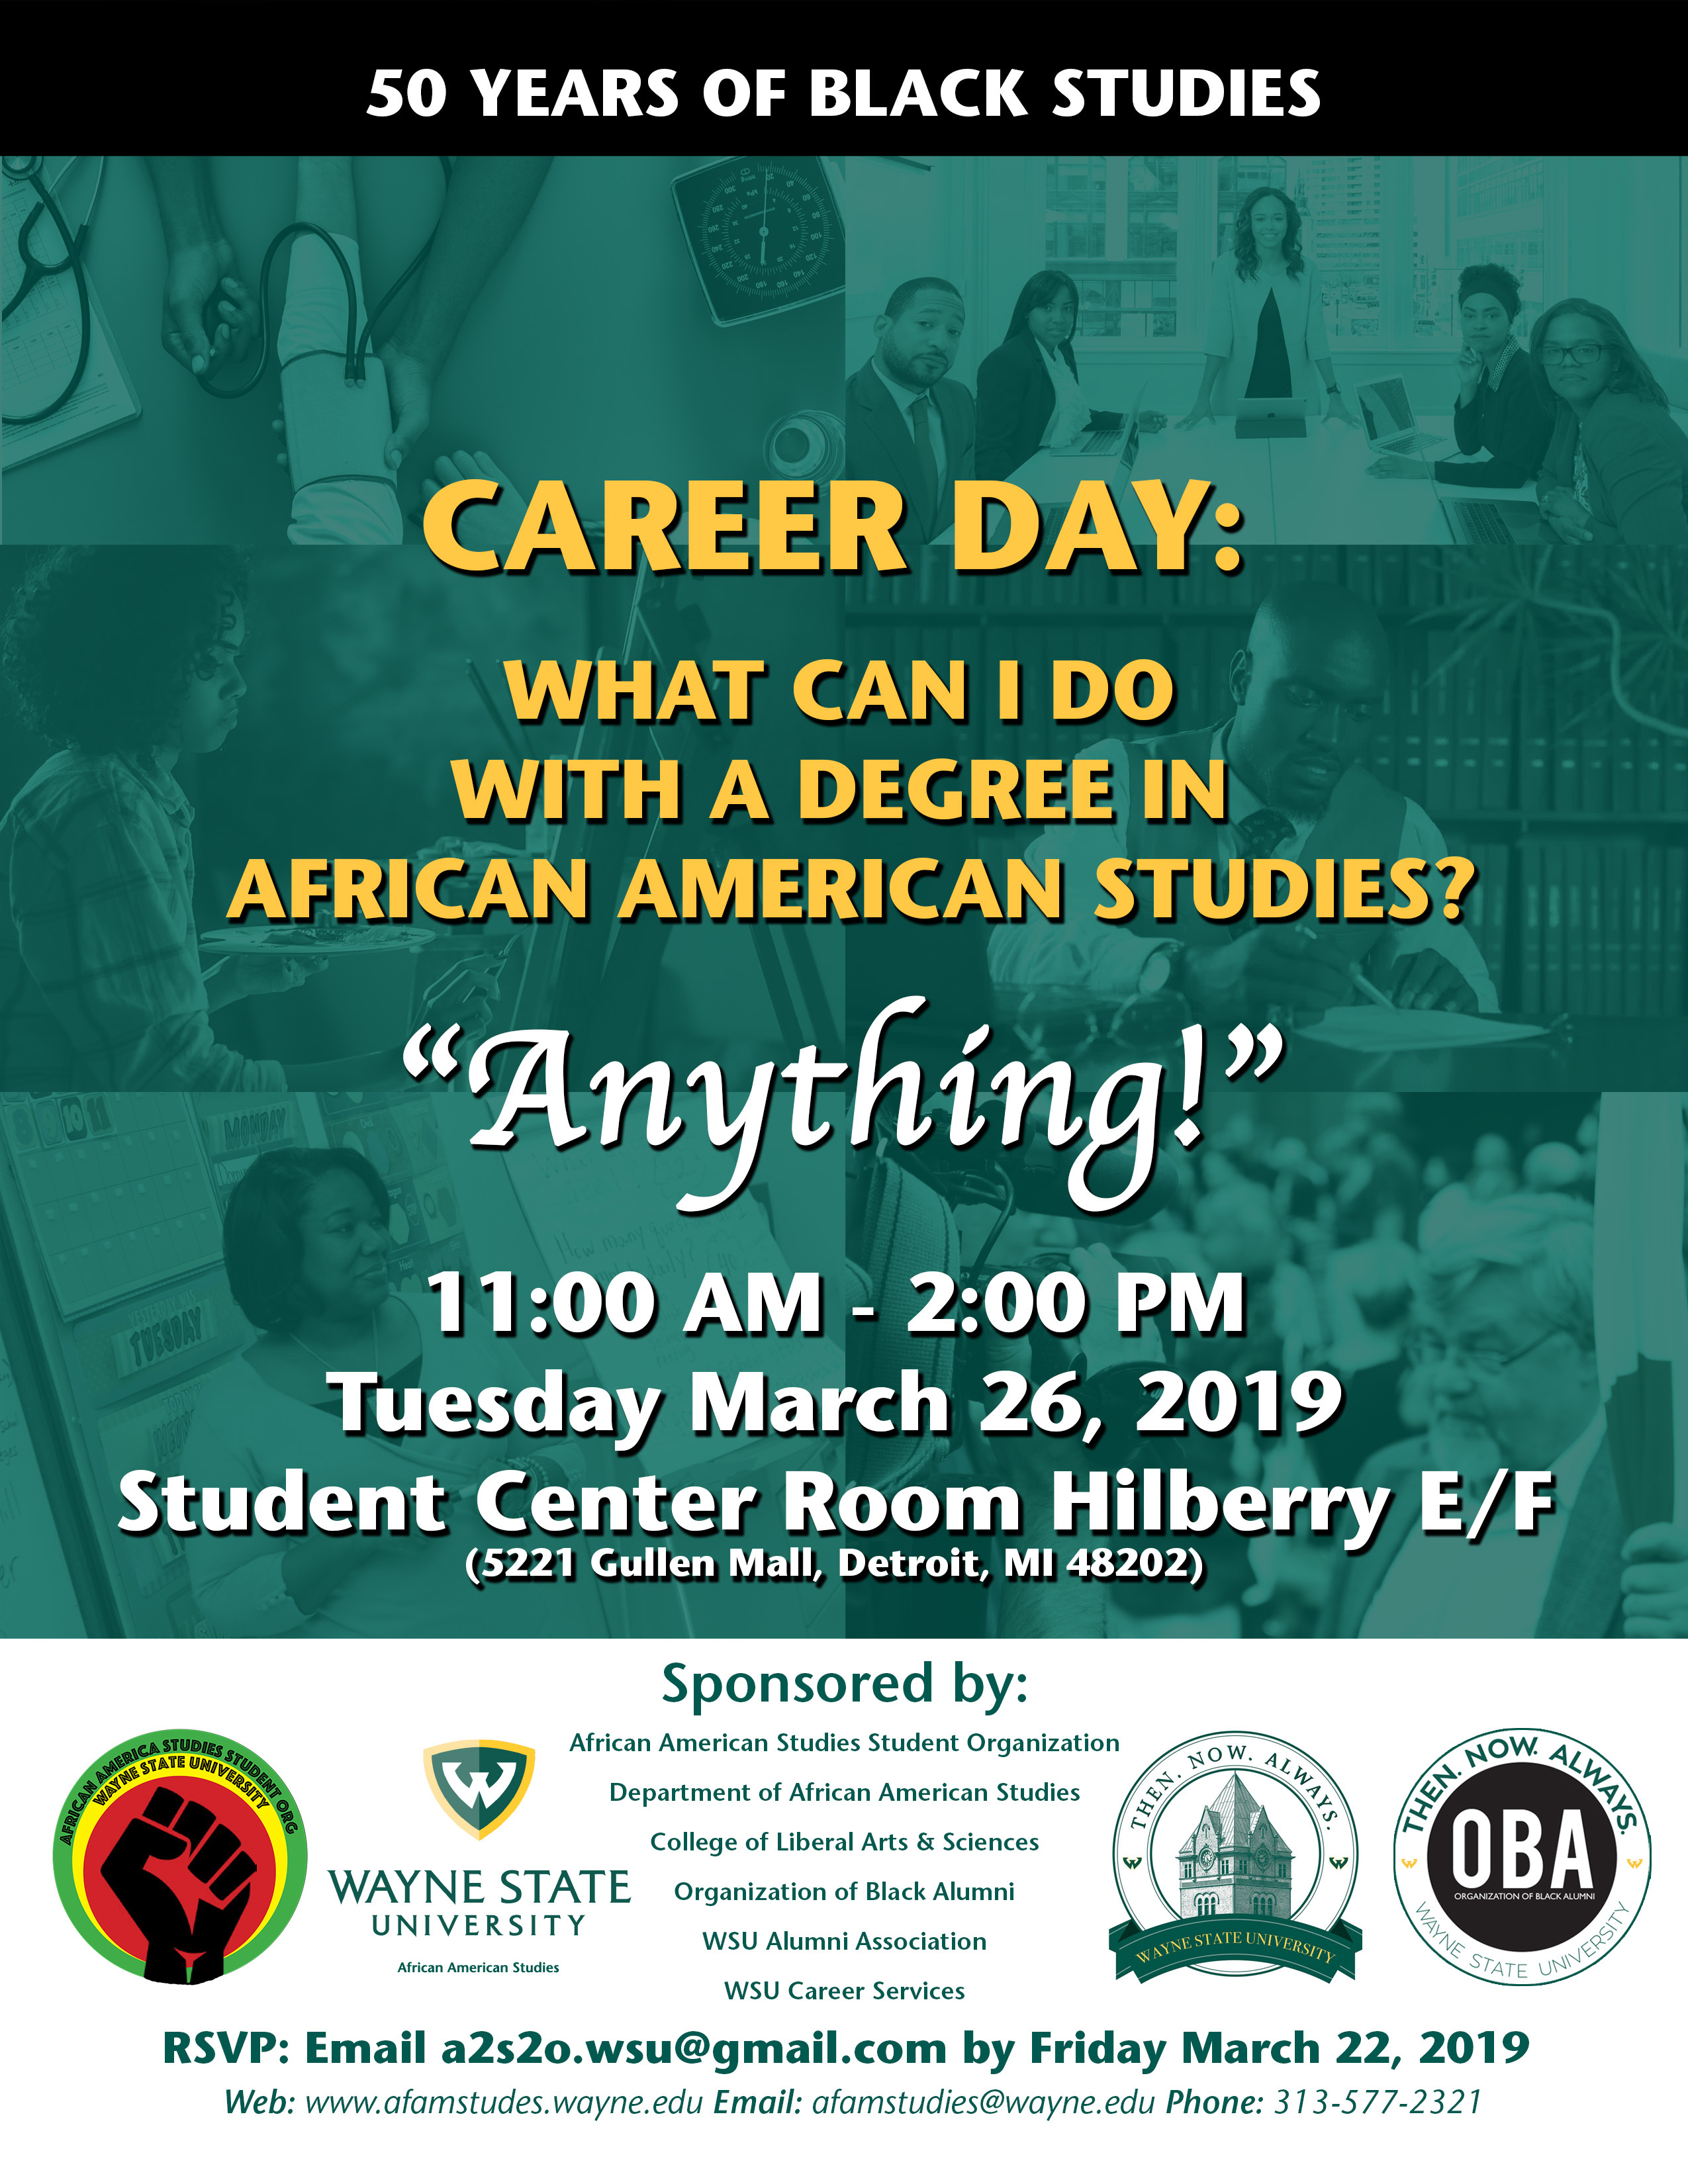 Flyer for Career Day, showing people in several career fields: health, business, art, law, education, media.